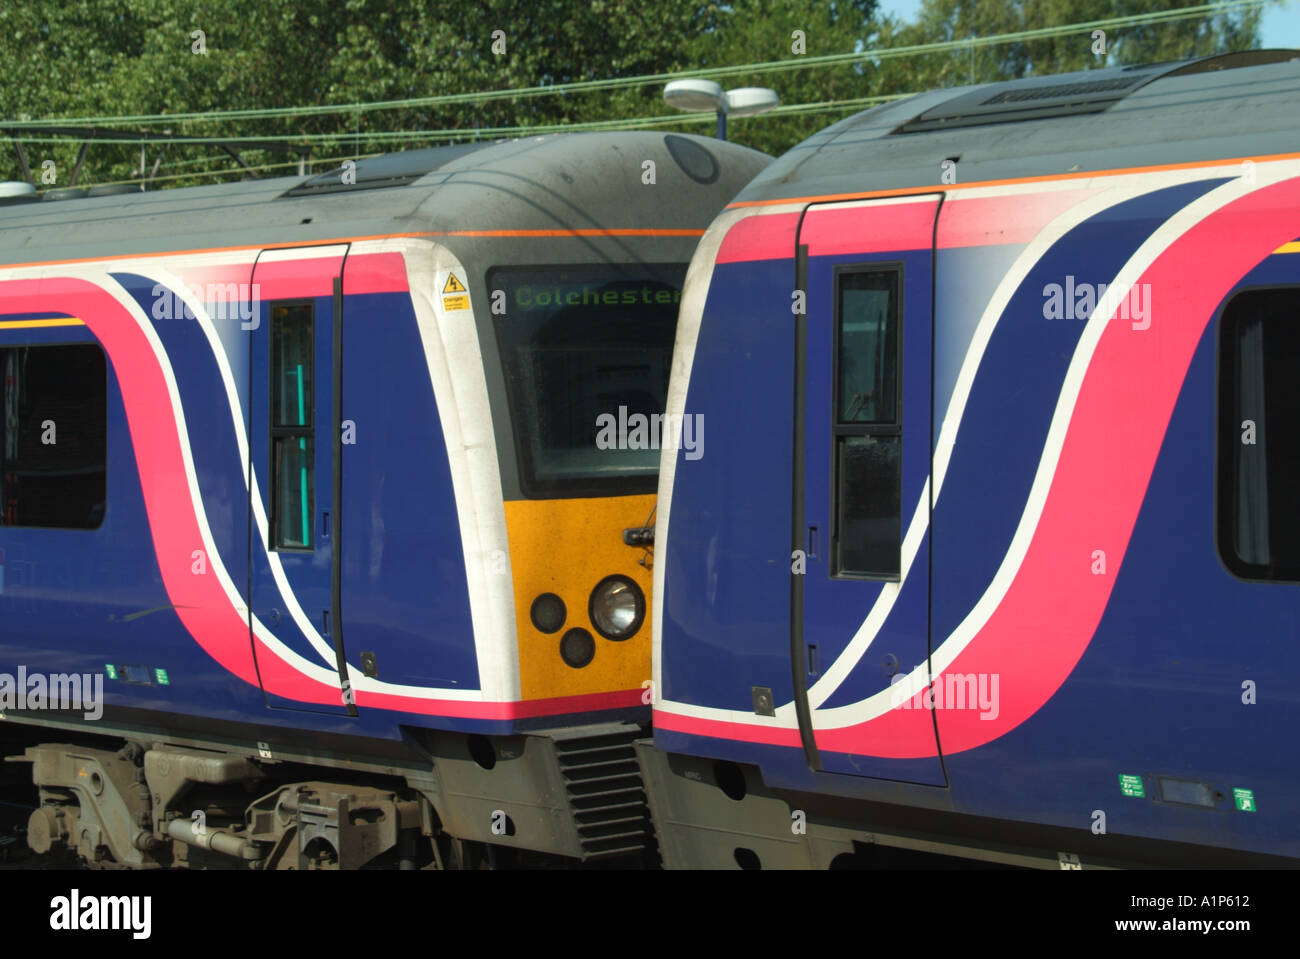 Graphic designs used on railway carriages to identify train operating company First Great Eastern Stock Photo